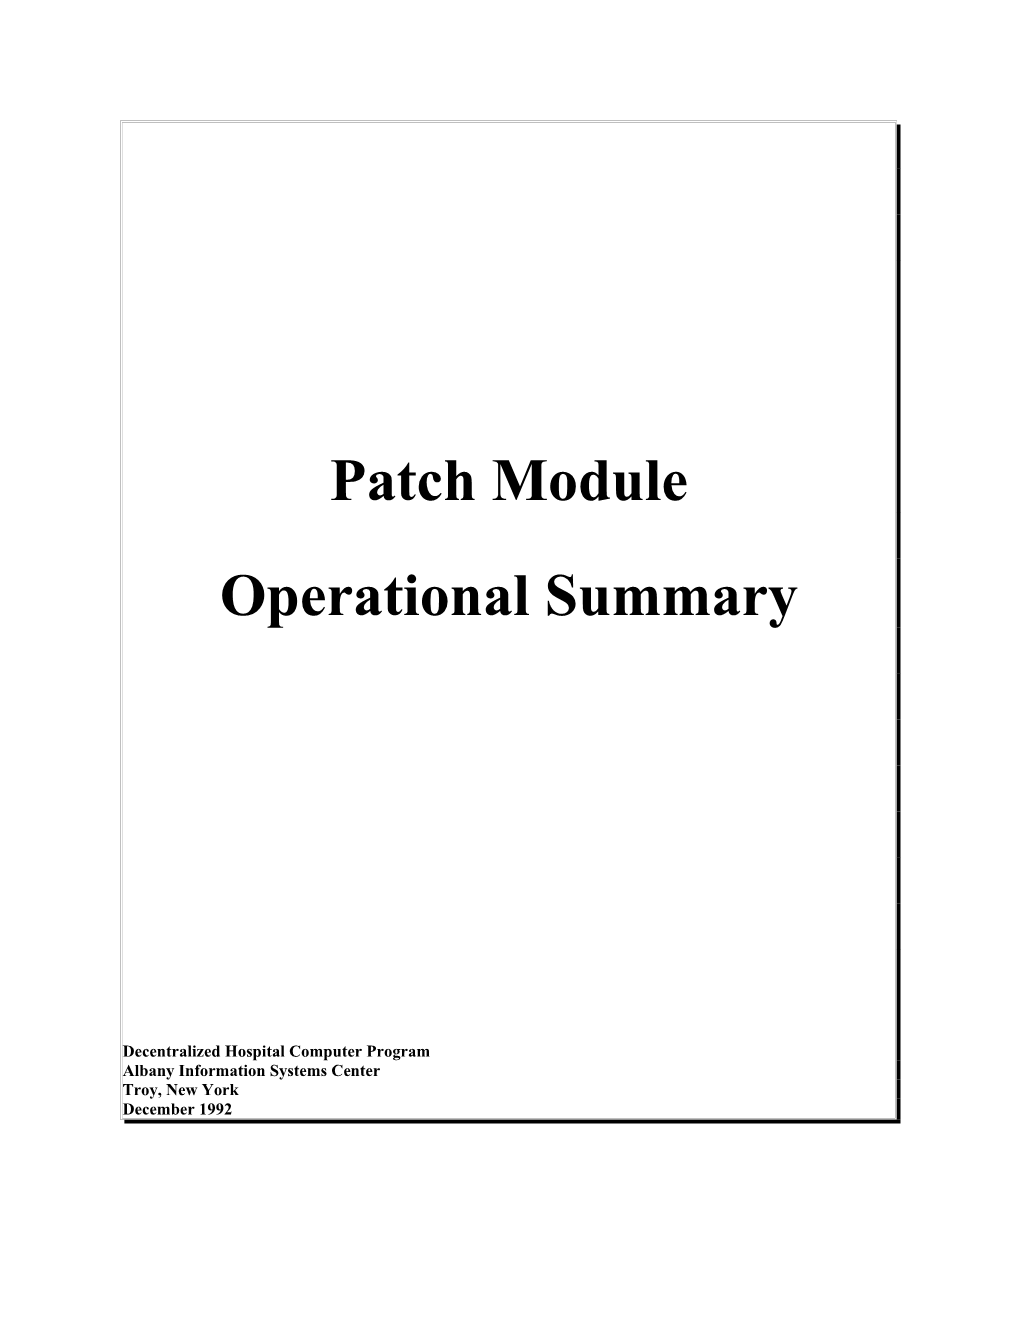 Patch Module Outputs